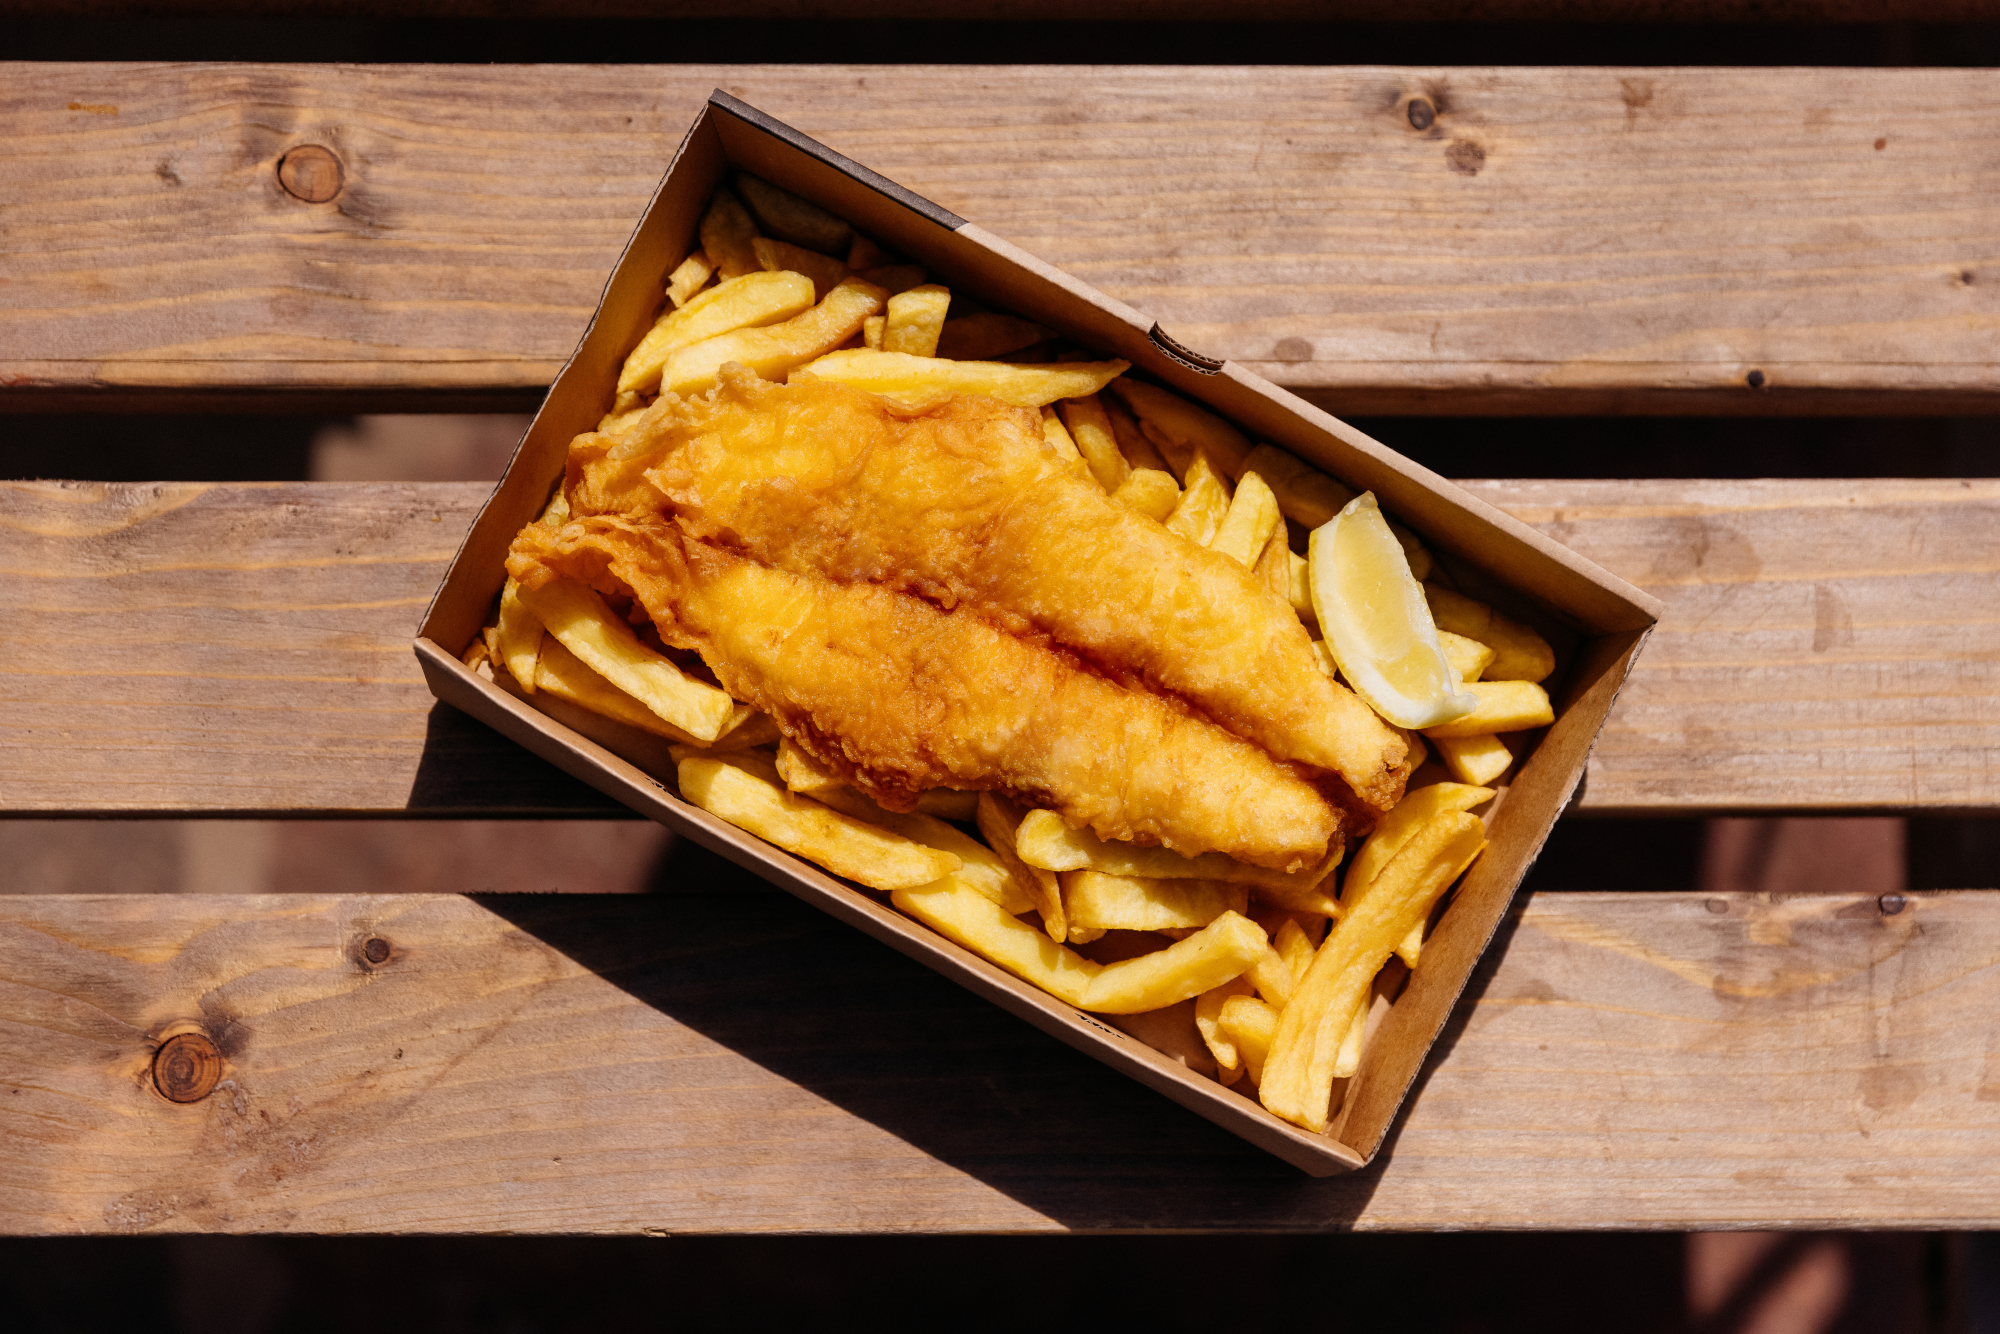 Photo of a portion of fish and chips in a takeaway box